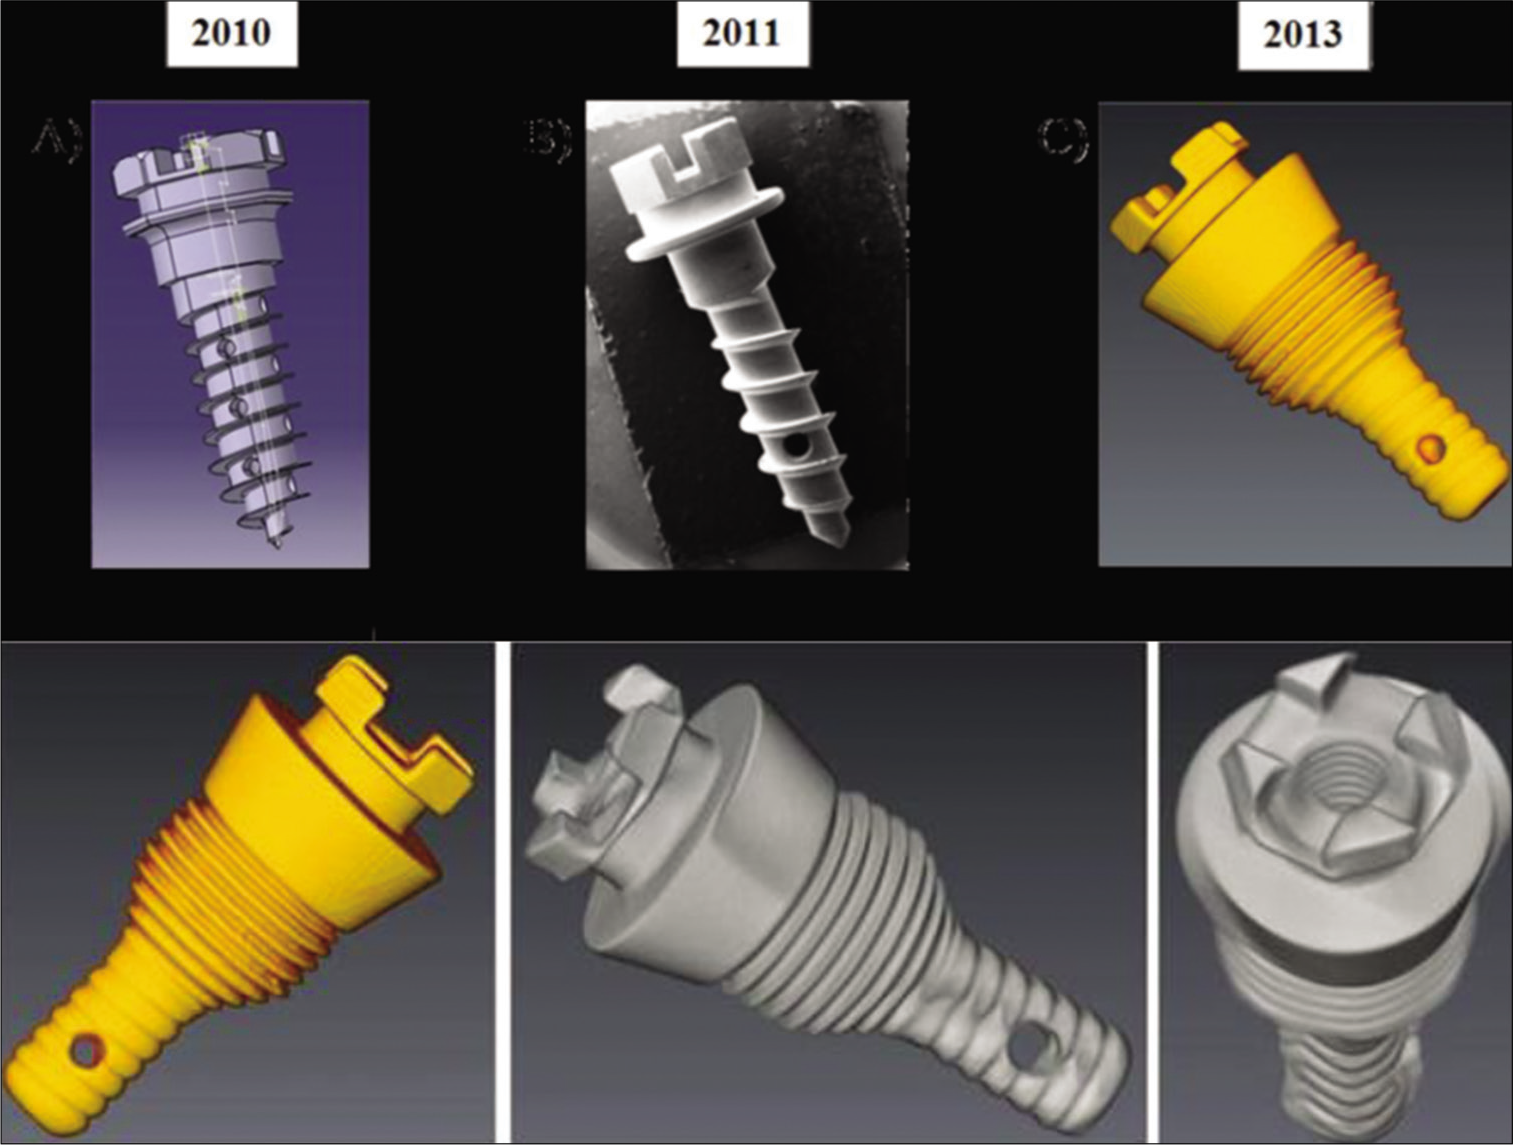 The Sydney Mini Screw (SMS, Patent number: PCT2009014). The initial implant design introduced in 2010, the SMS has seen several refinements with the current design having a dispersion capacity of an injectable bone graft.